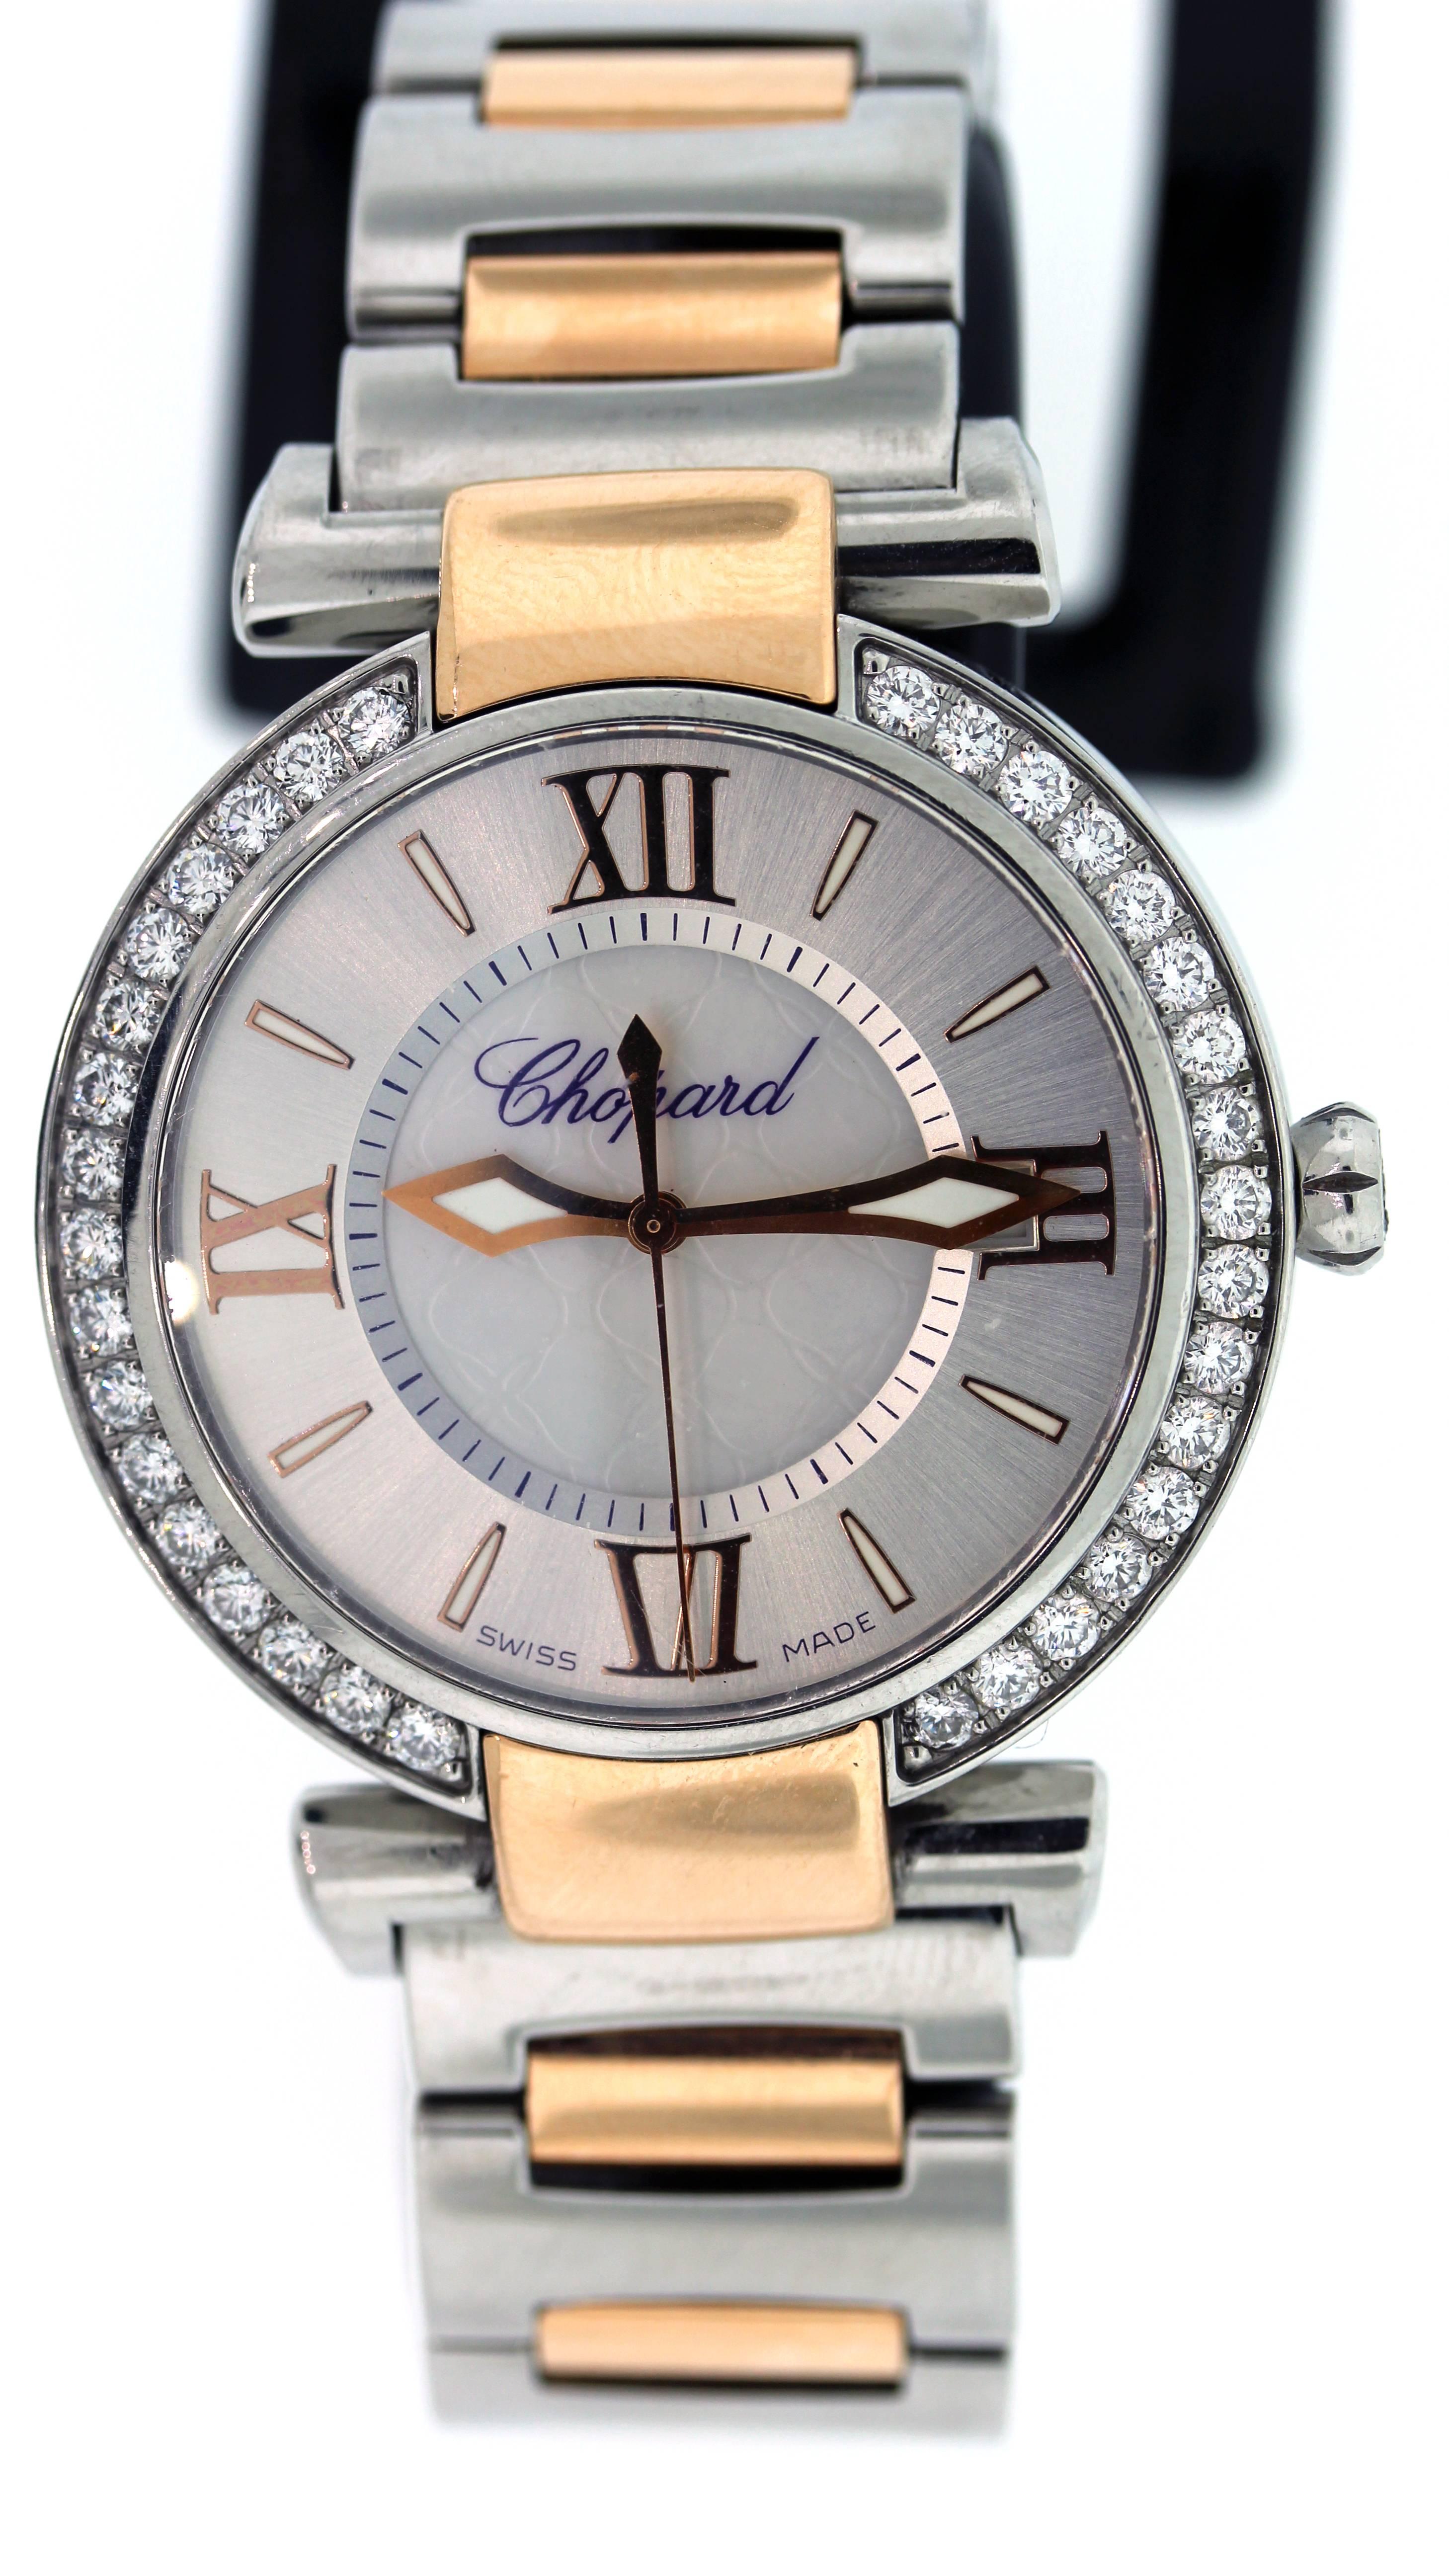 Chopard Imperial Ladies Watch with Diamonds, Rose Gold and Stainless Steel

Ref: 388532-6004. 
Serial Number: 1757072

36mm Stainless Steel and Rose Gold case with one amethyst set in the crown. 

1.17ct. Diamond bezel, mother of pearl dial

Quartz